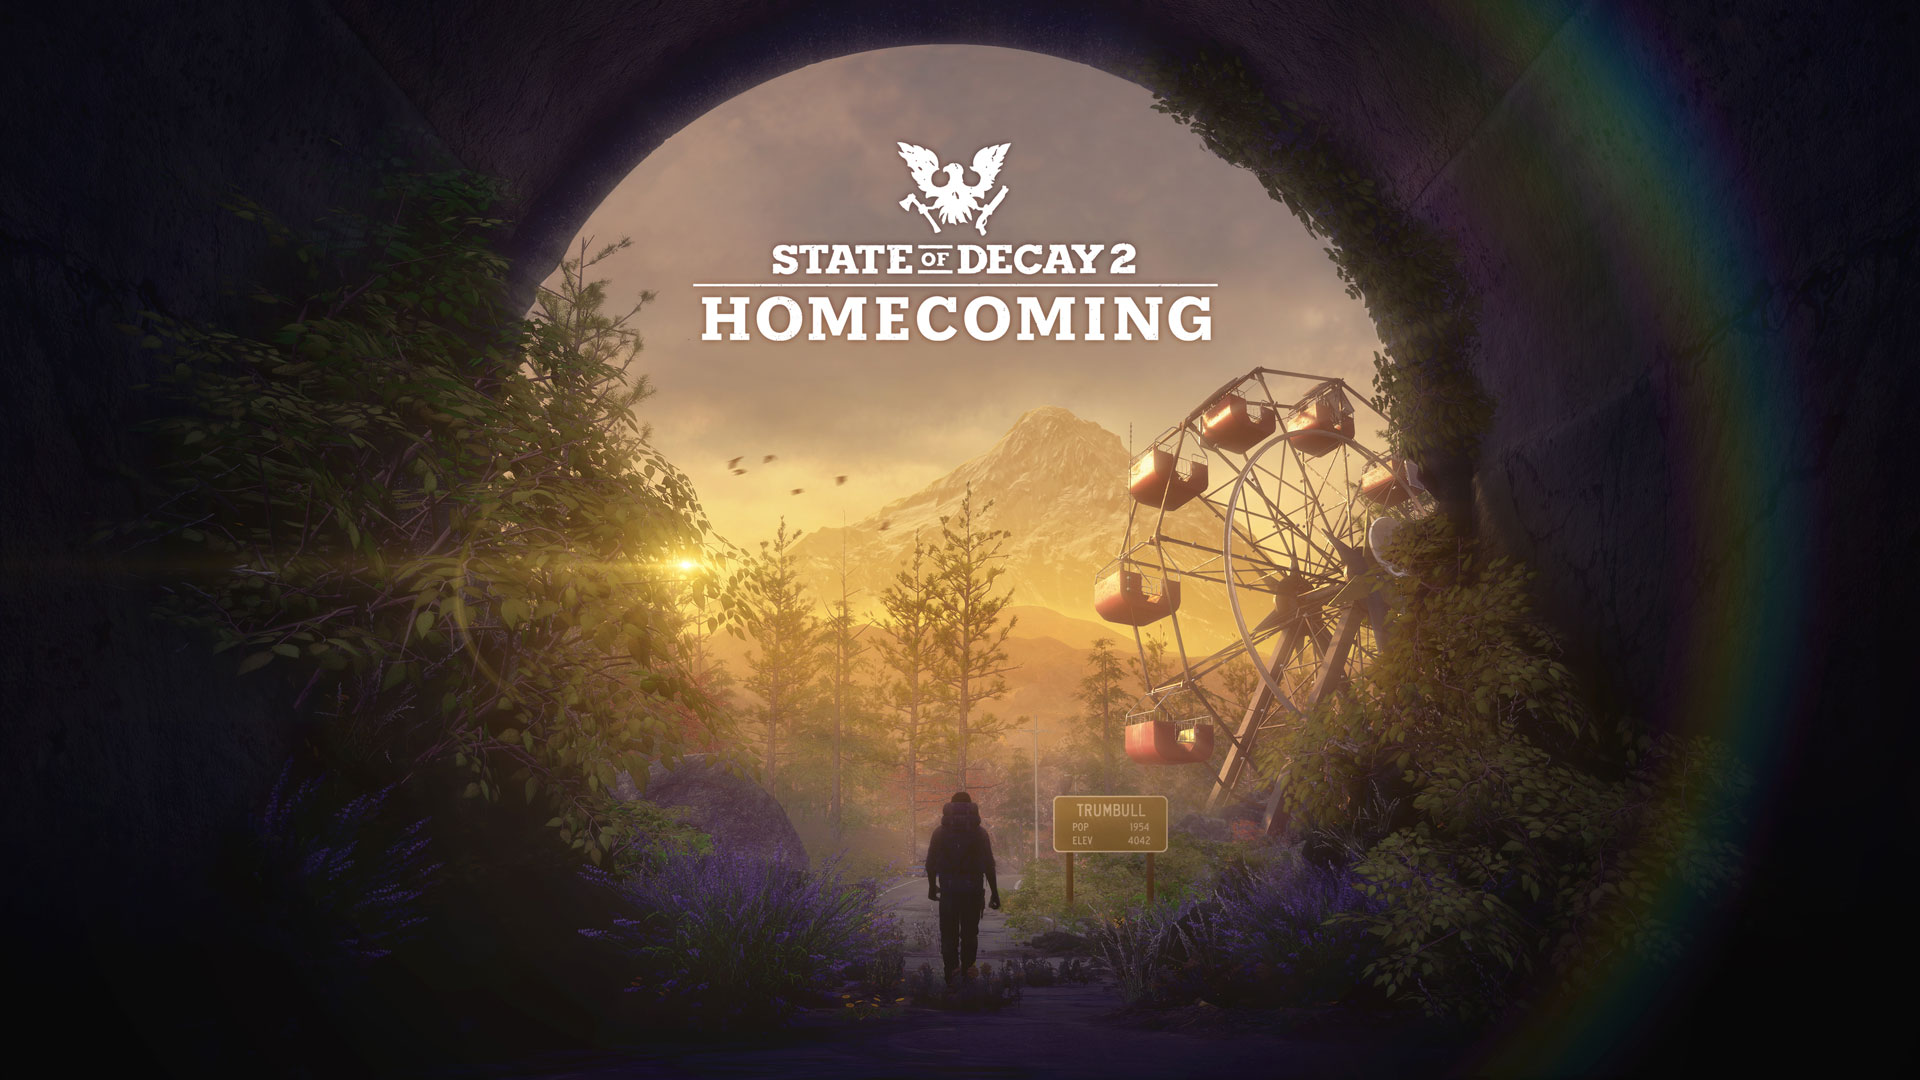 Video For Available Now: The ‘Homecoming’ Update for State of Decay 2